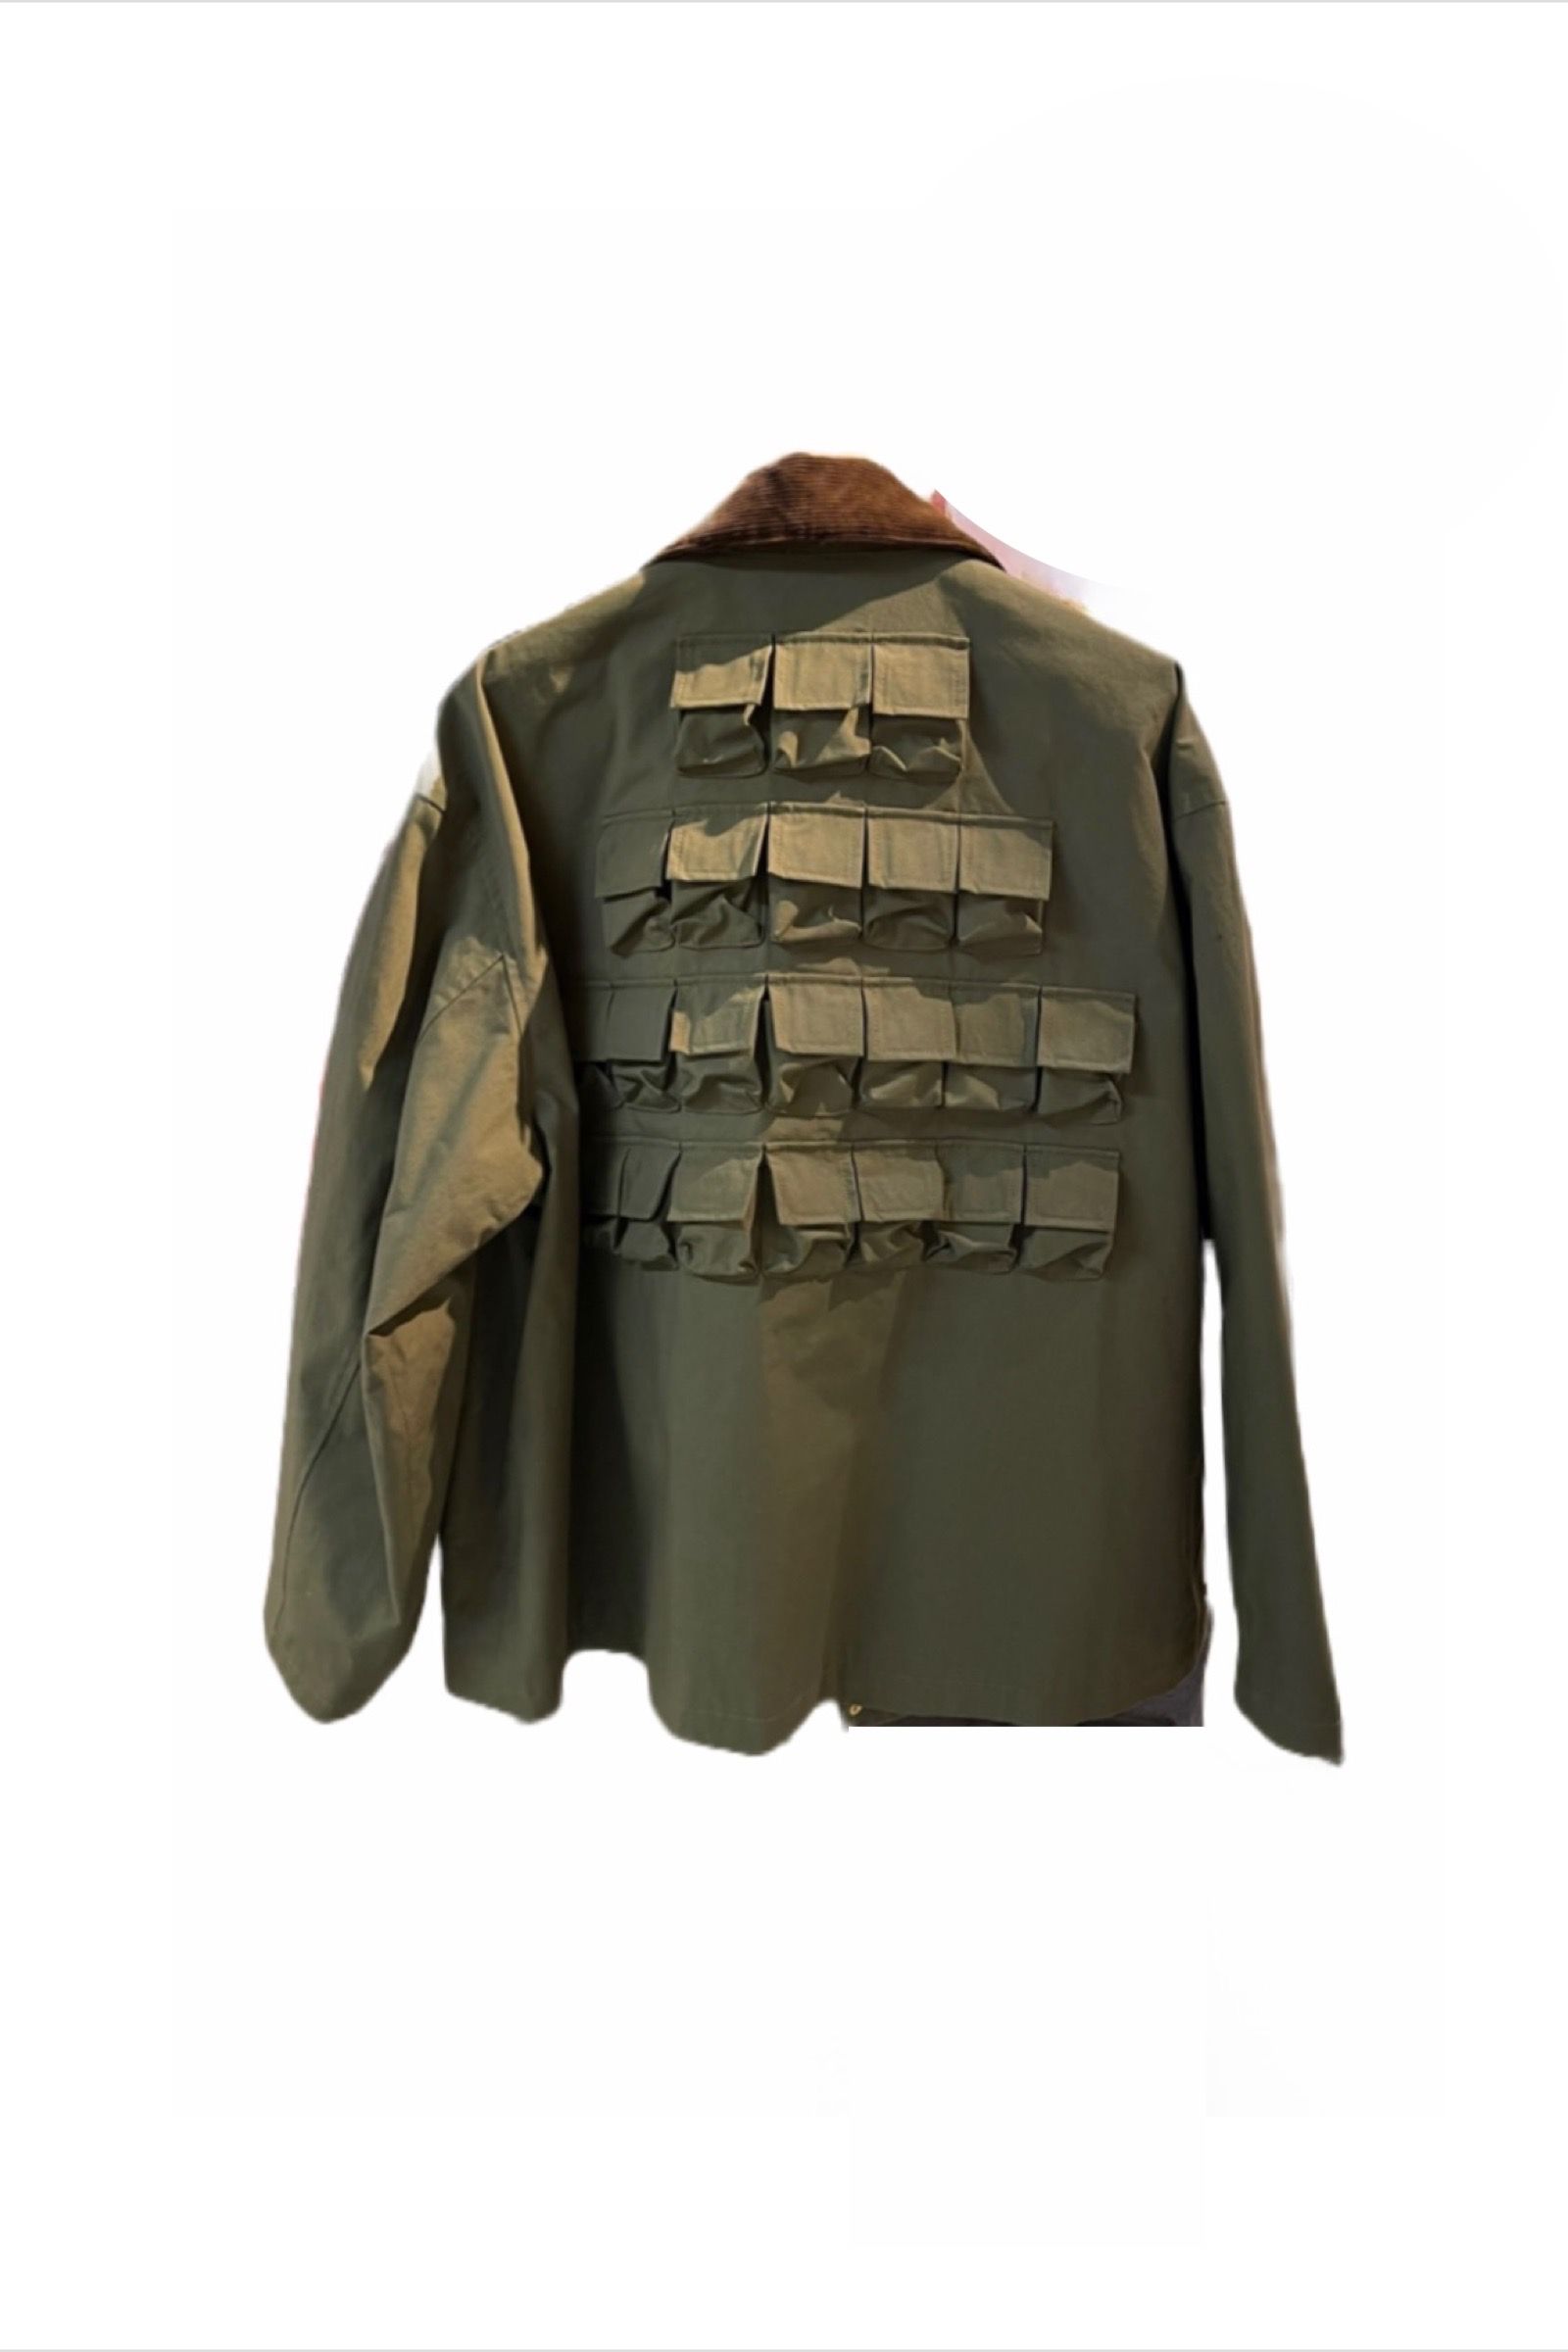 is-ness - general research parasite for is-ness parasite jacket ...